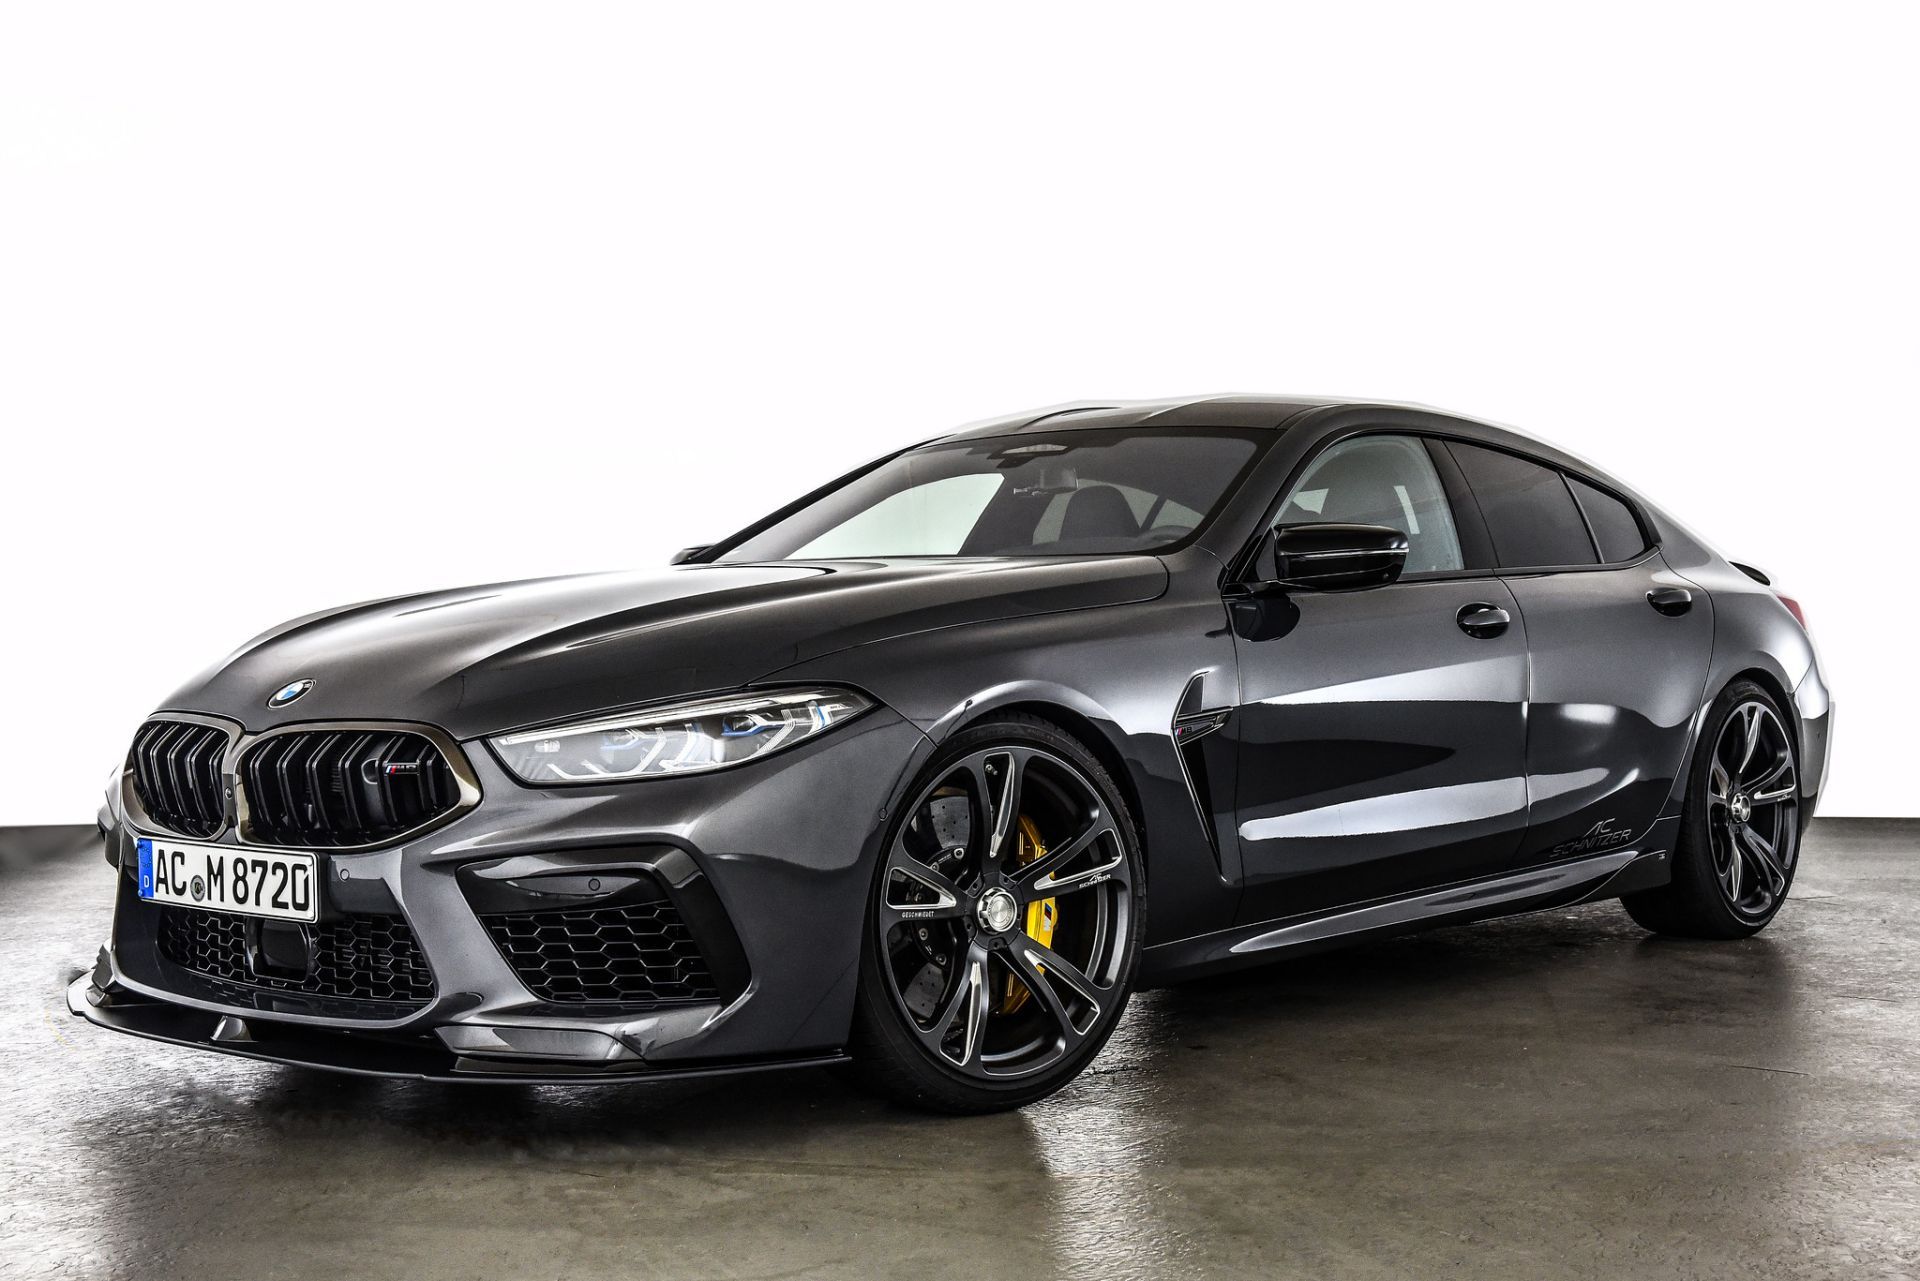 Bmw m 8 competition. BMW m8 Competition Gran Coupe. BMW m8 Competition Gran Coupe 2021. BMW m8 Competition Gran Coupe 2020 чёрная. BMW m8 Competition Gran Coupe f93.